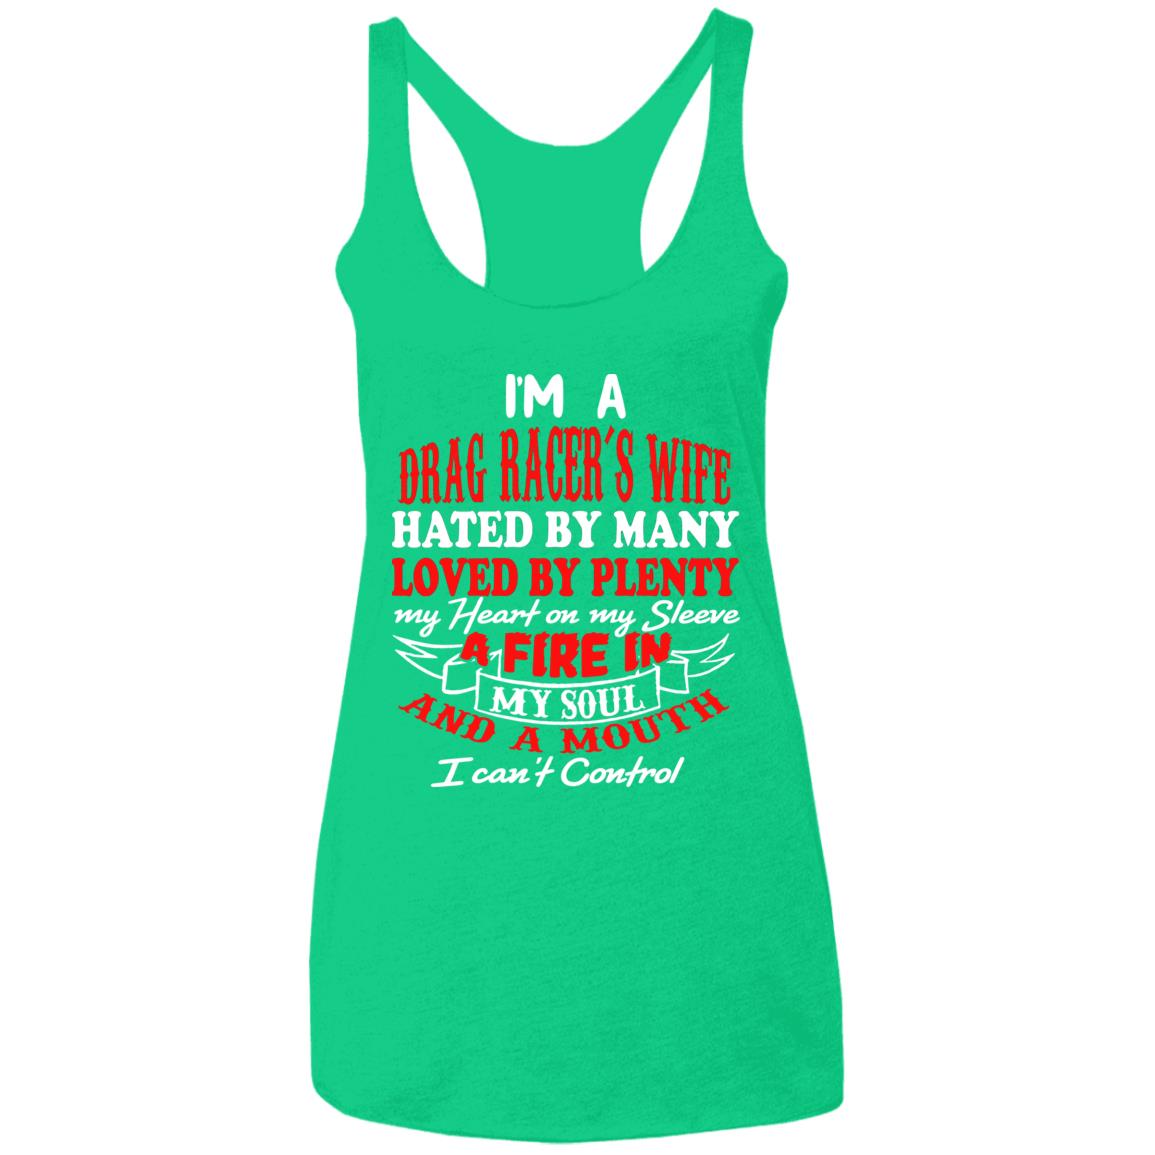 I'm A Drag Racer's Wife Hated By Many Loved By Plenty Ladies' Triblend Racerback Tank